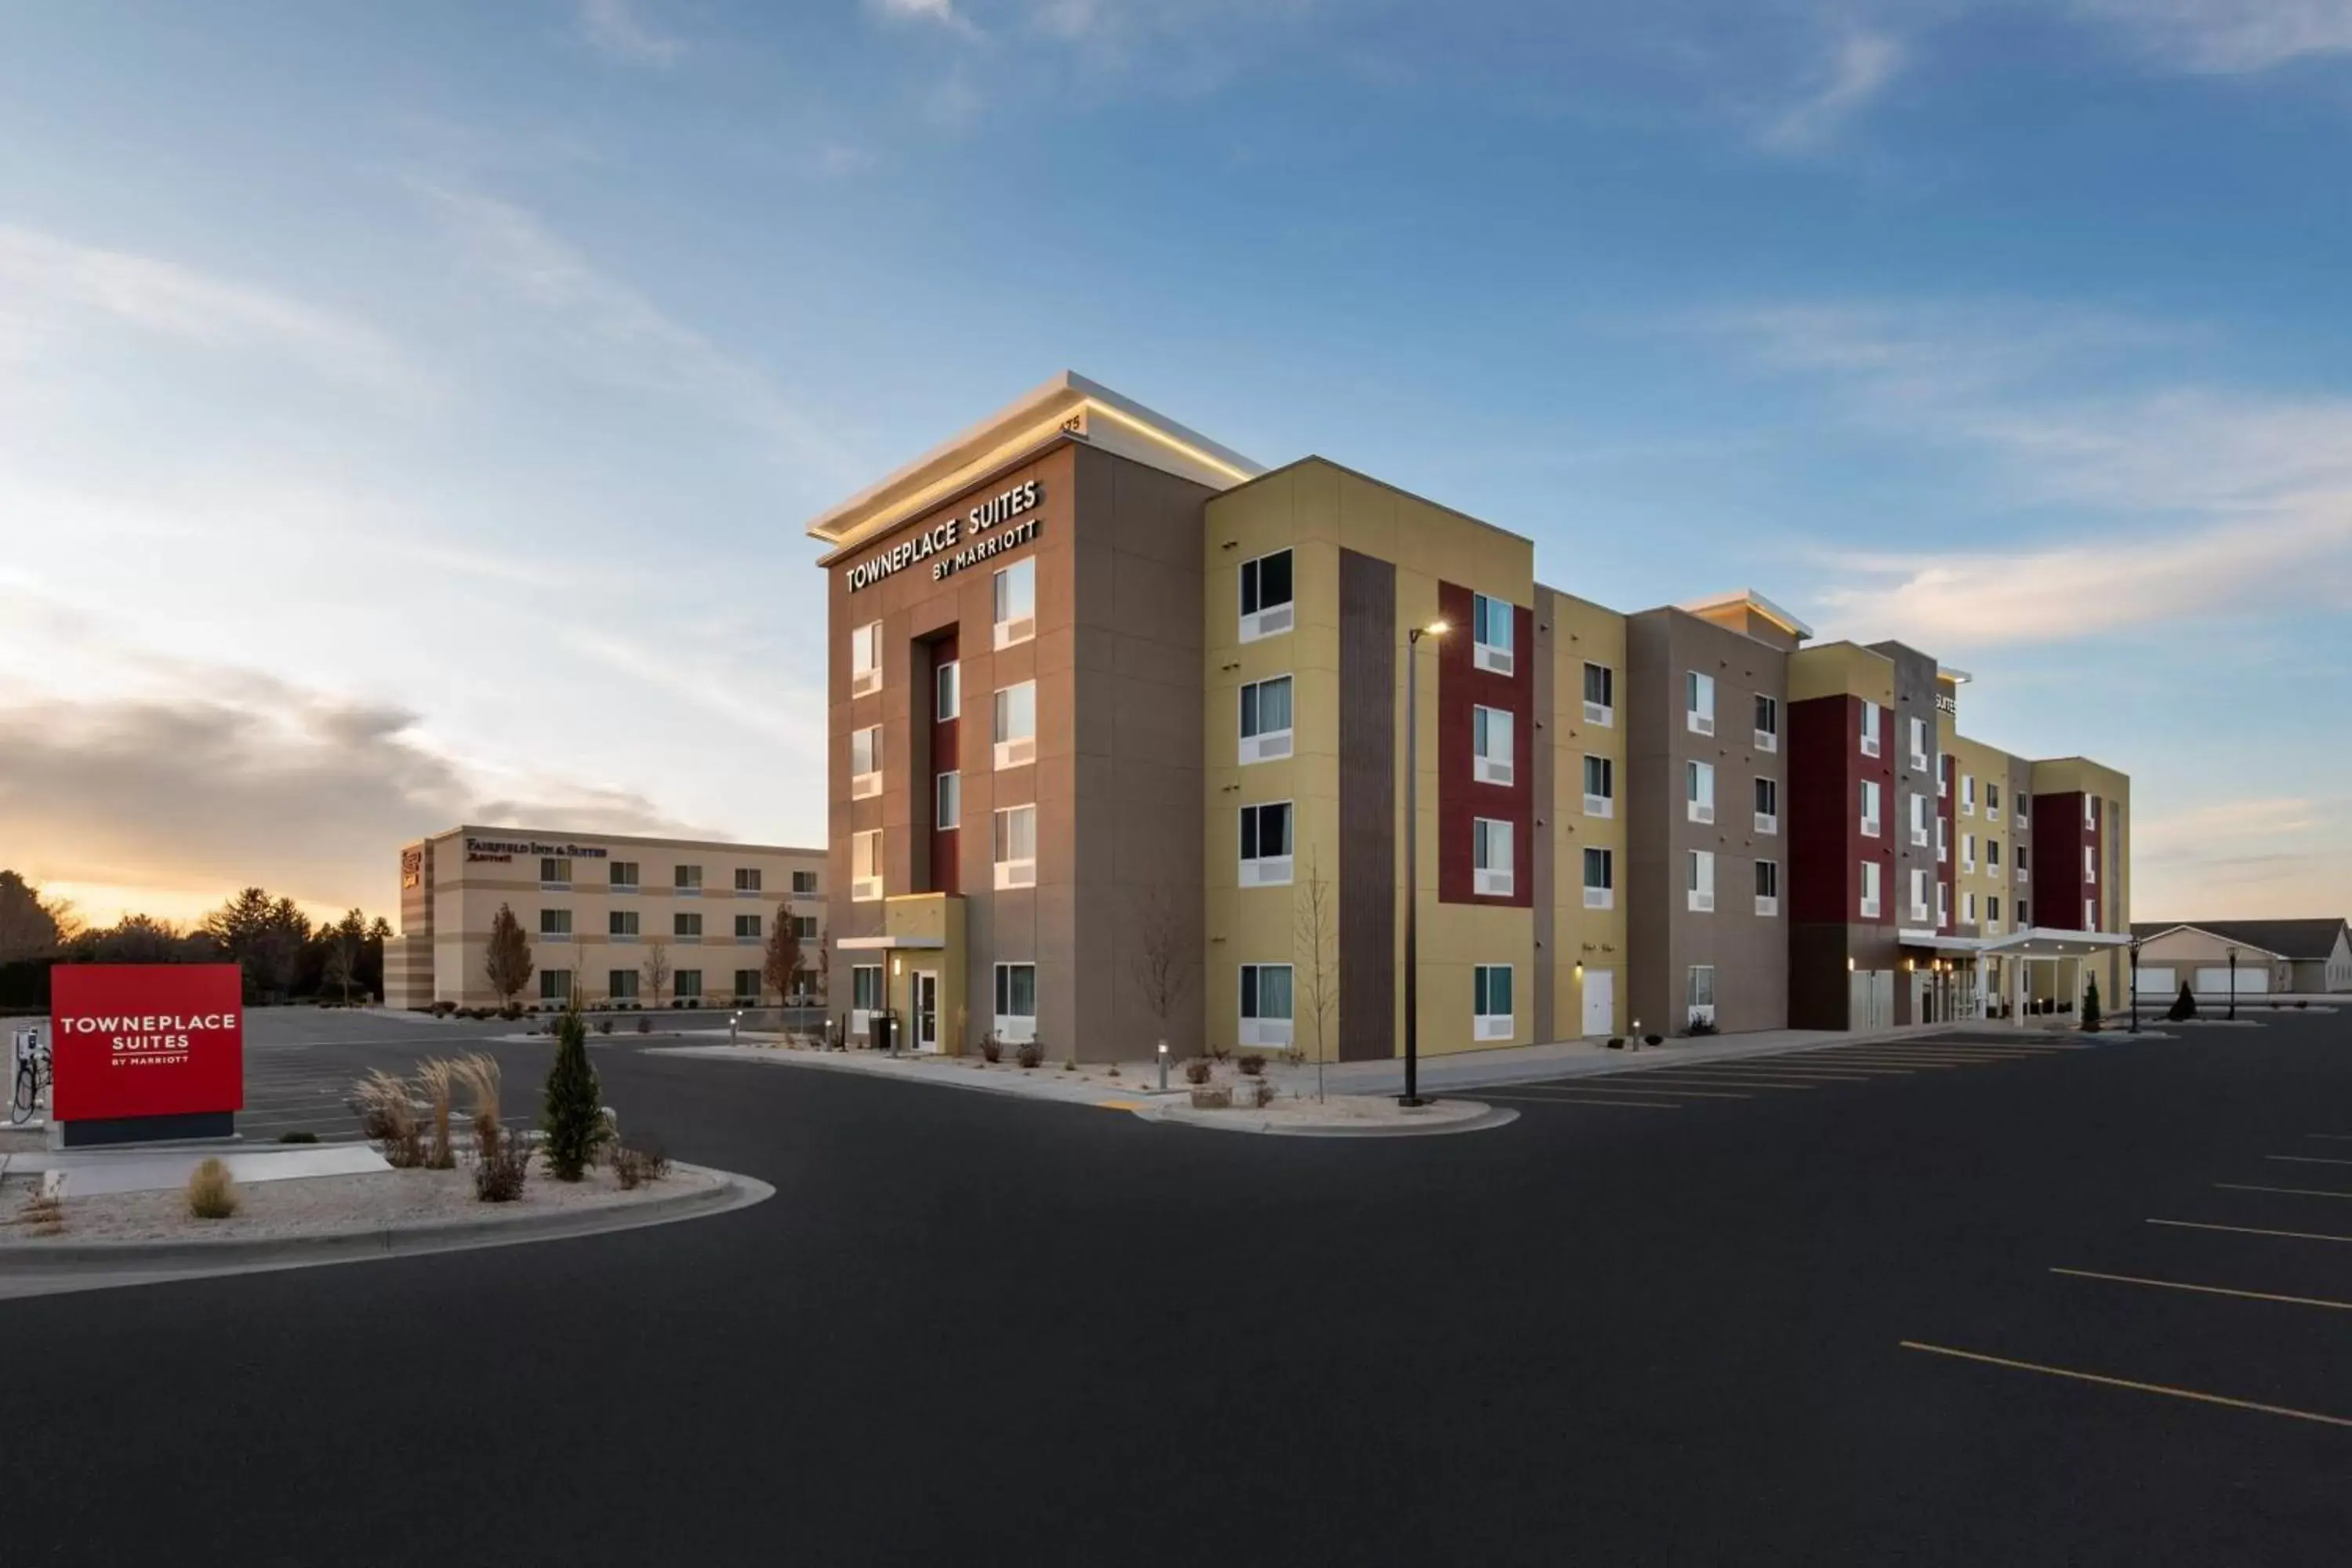 Property Building in TownePlace Suites by Marriott Twin Falls